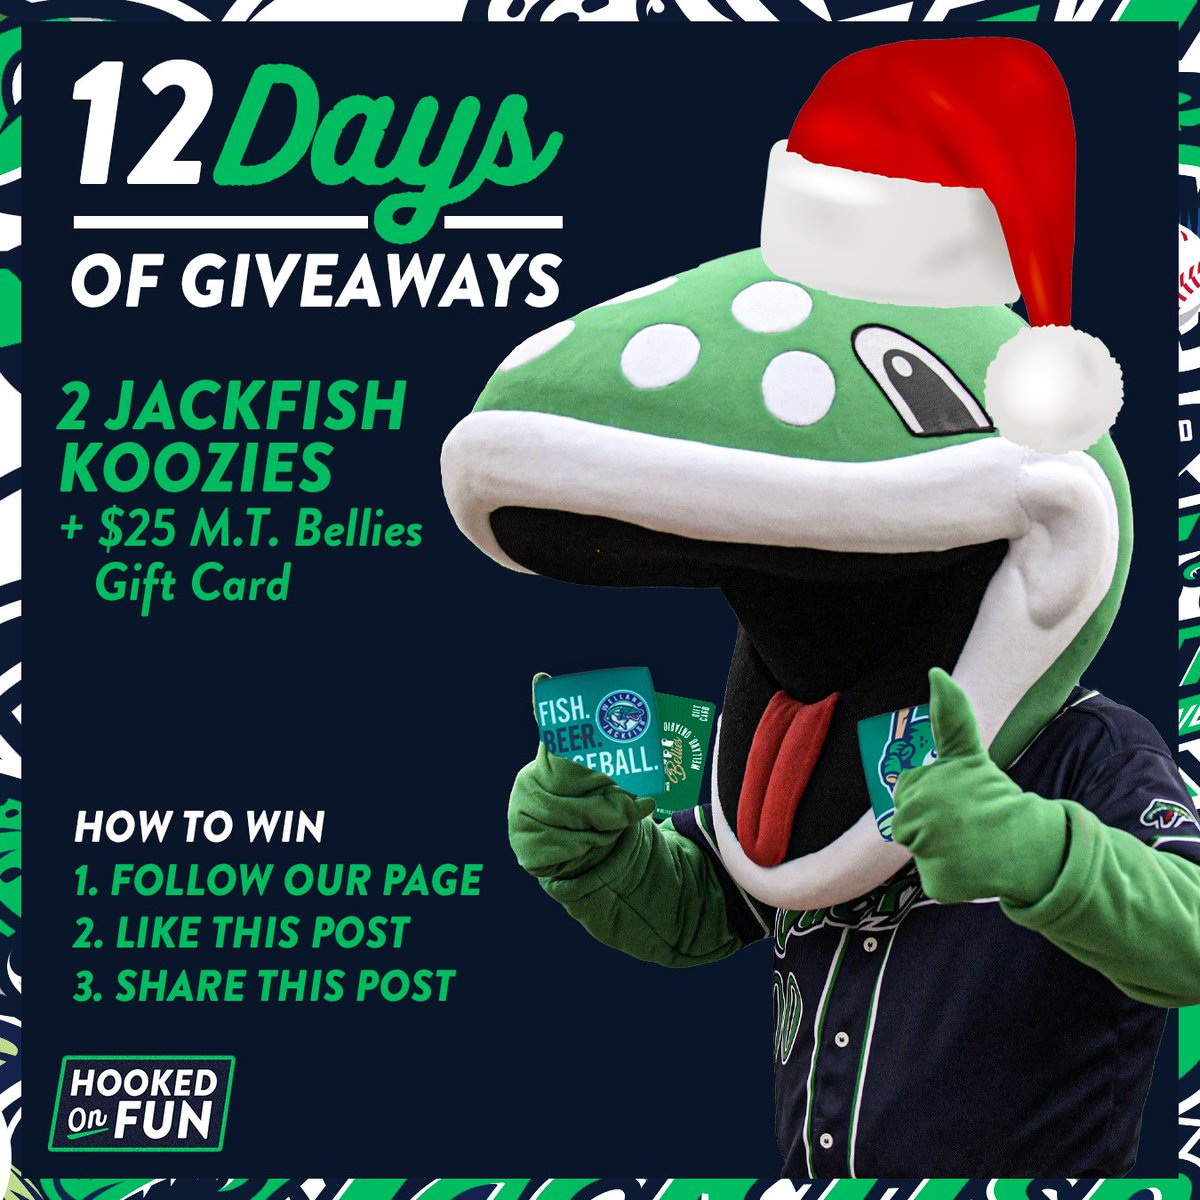 Here comes Jacques-a-Claus, here comes Jacques-a-Claus right down Quaker Road Lane! Day Four FINatics! Jacques is tossin' koozies left and right and a $25 M.T. Bellies Gift Card to boot! 1. Follow us 2. Like this post 3. Share this post Winner to be announced at 3pm